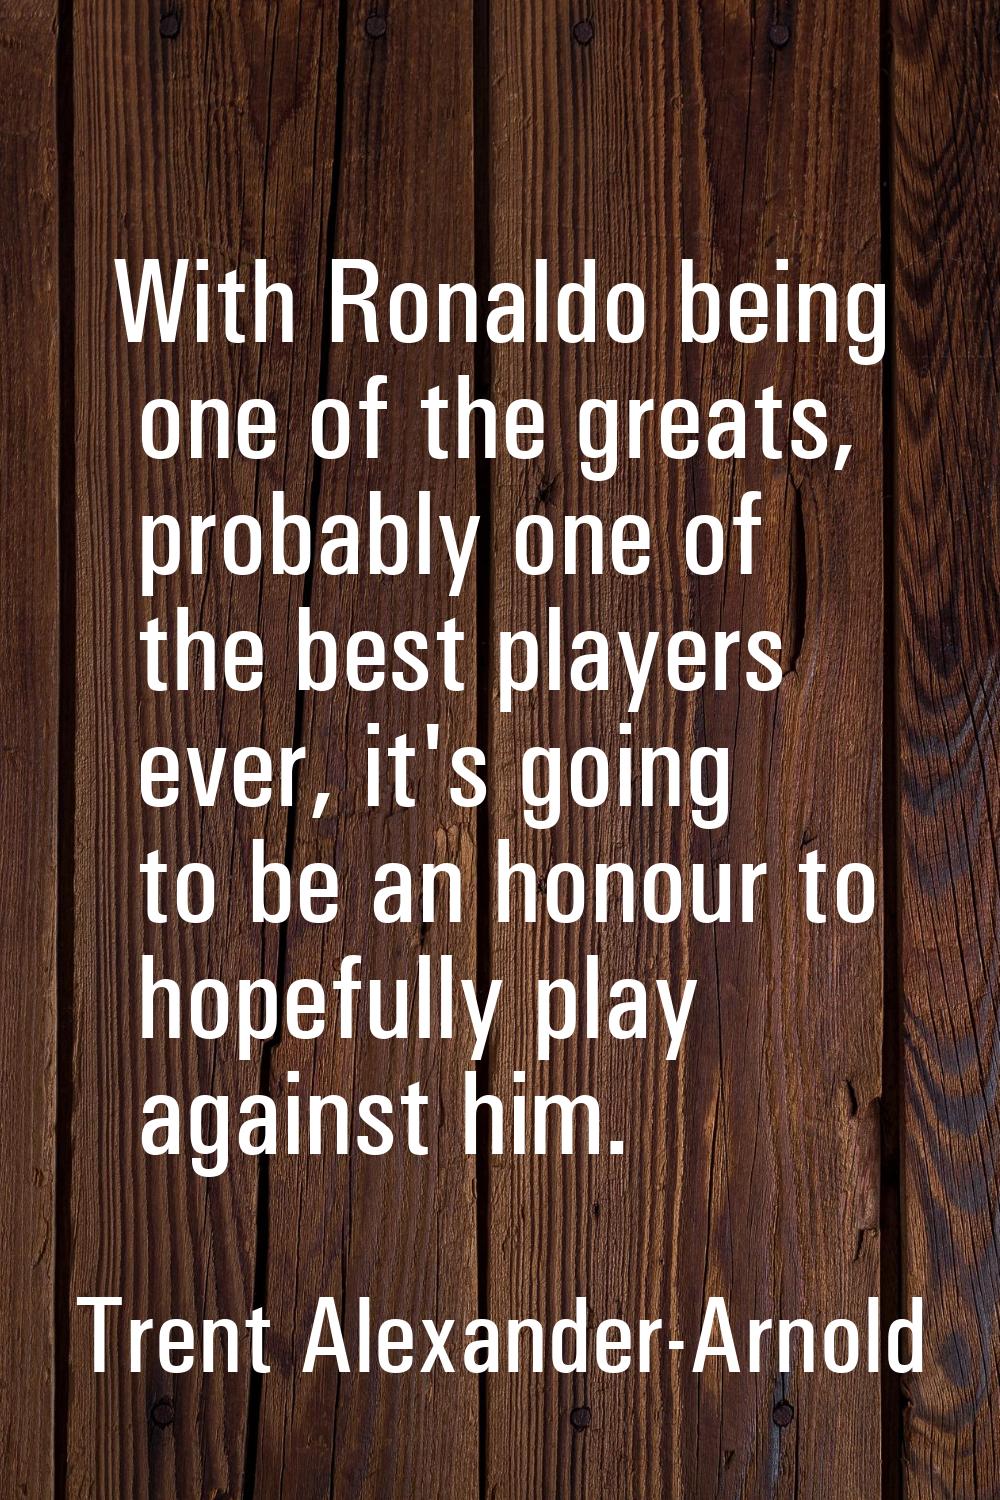 With Ronaldo being one of the greats, probably one of the best players ever, it's going to be an ho